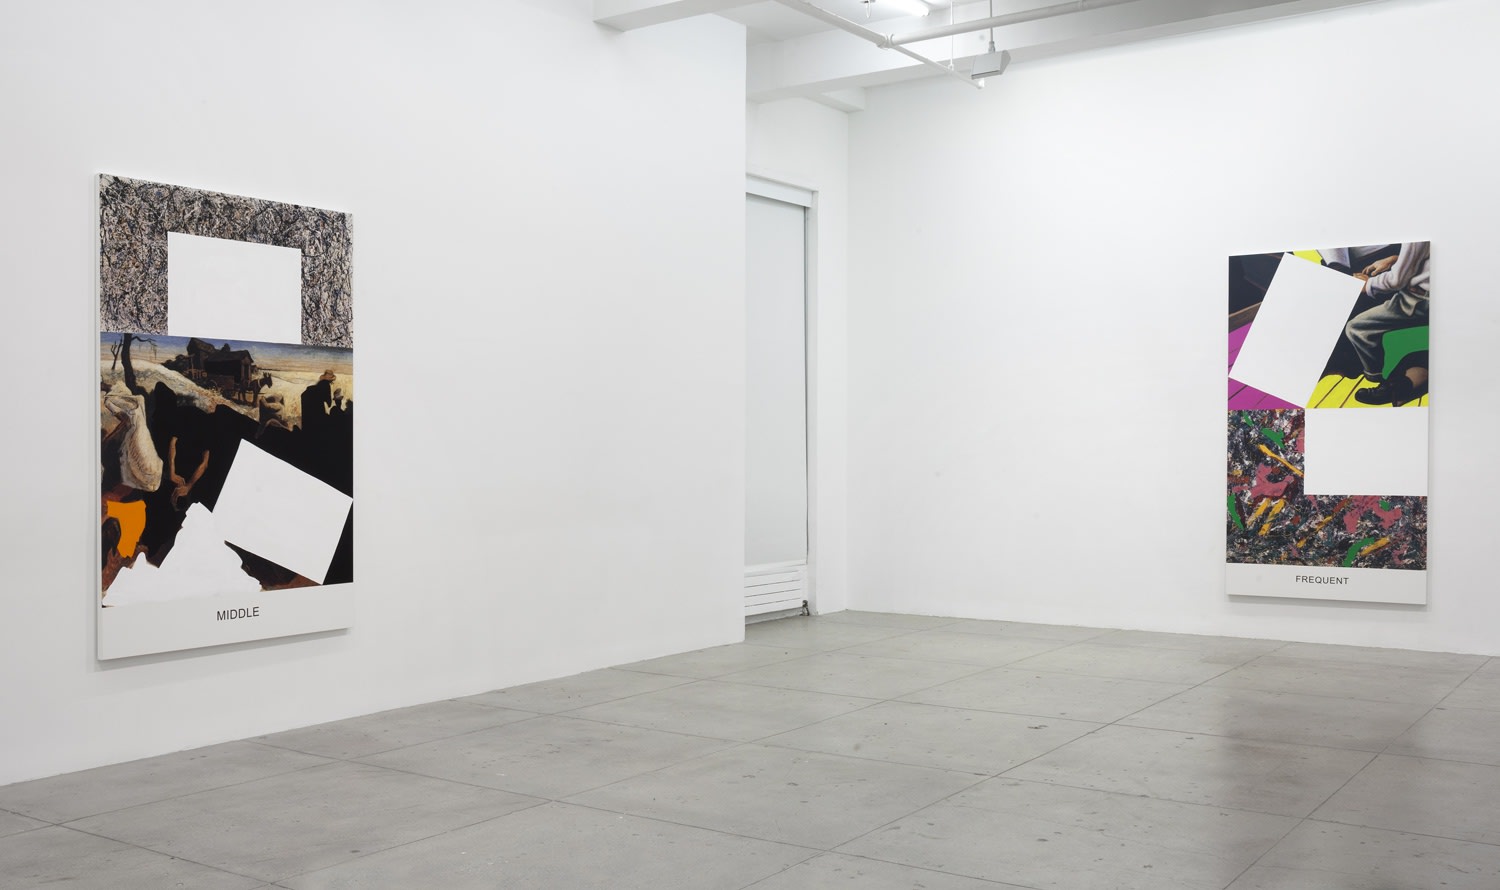 2 paintings partially covered with white rectangles hanging in a gallery space.